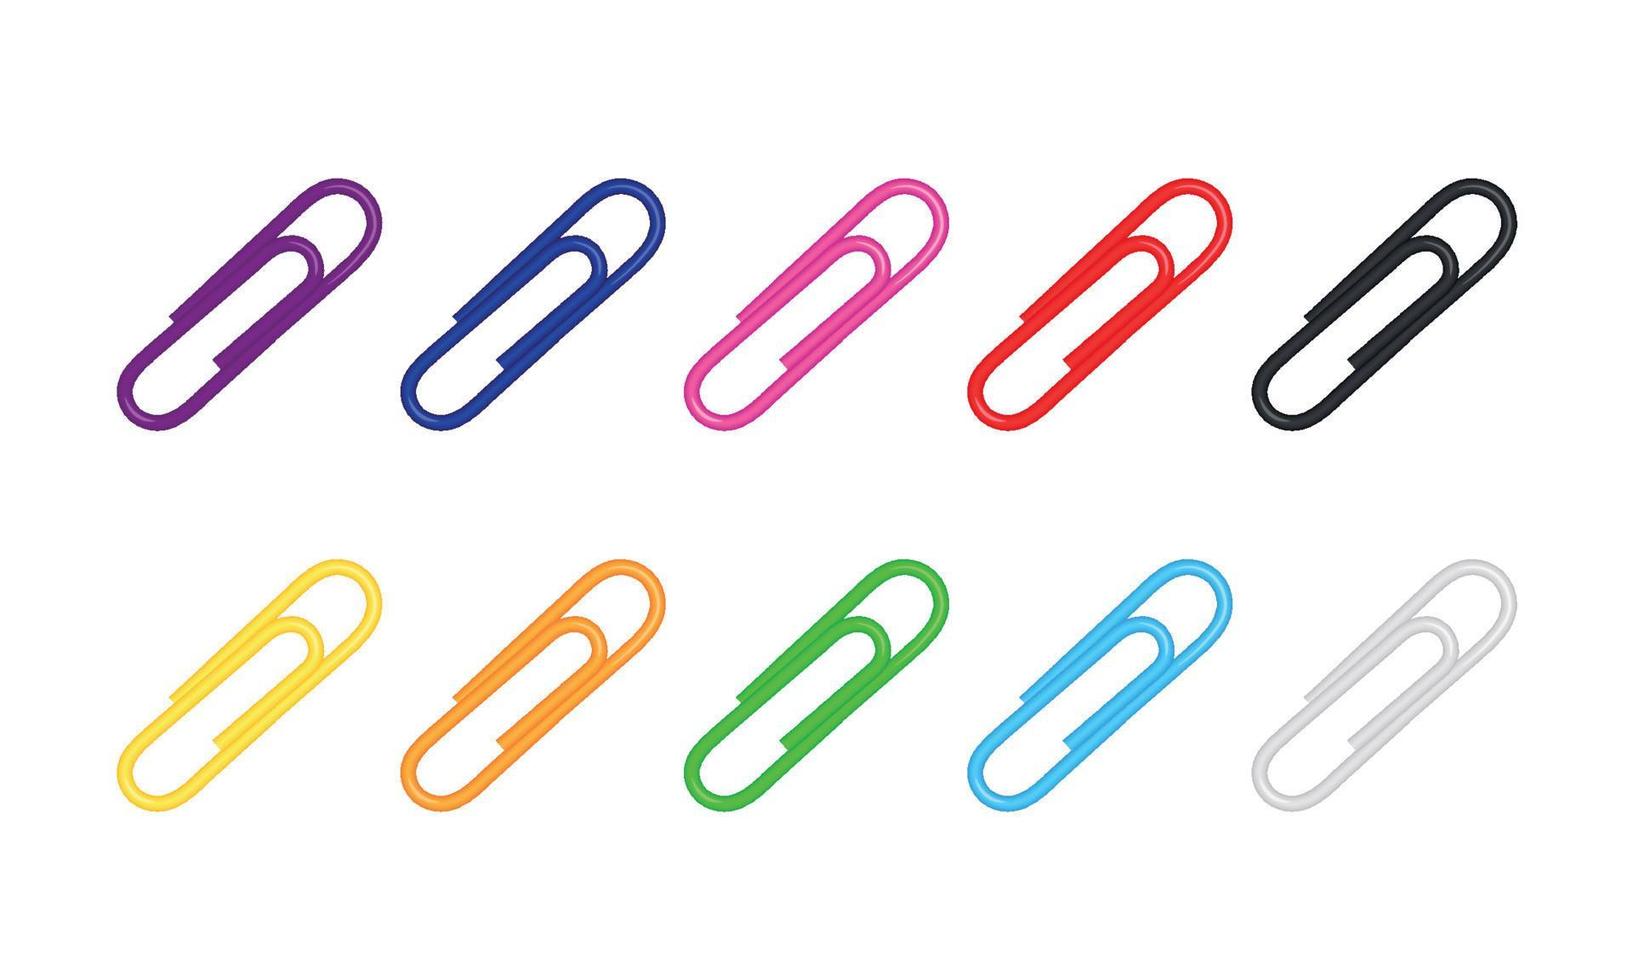 3d realistic vector set of metal paper clips. Purple, red, blue, black, white, green, yellow, orange, pink. Isolated on white background. Editable vector illutration